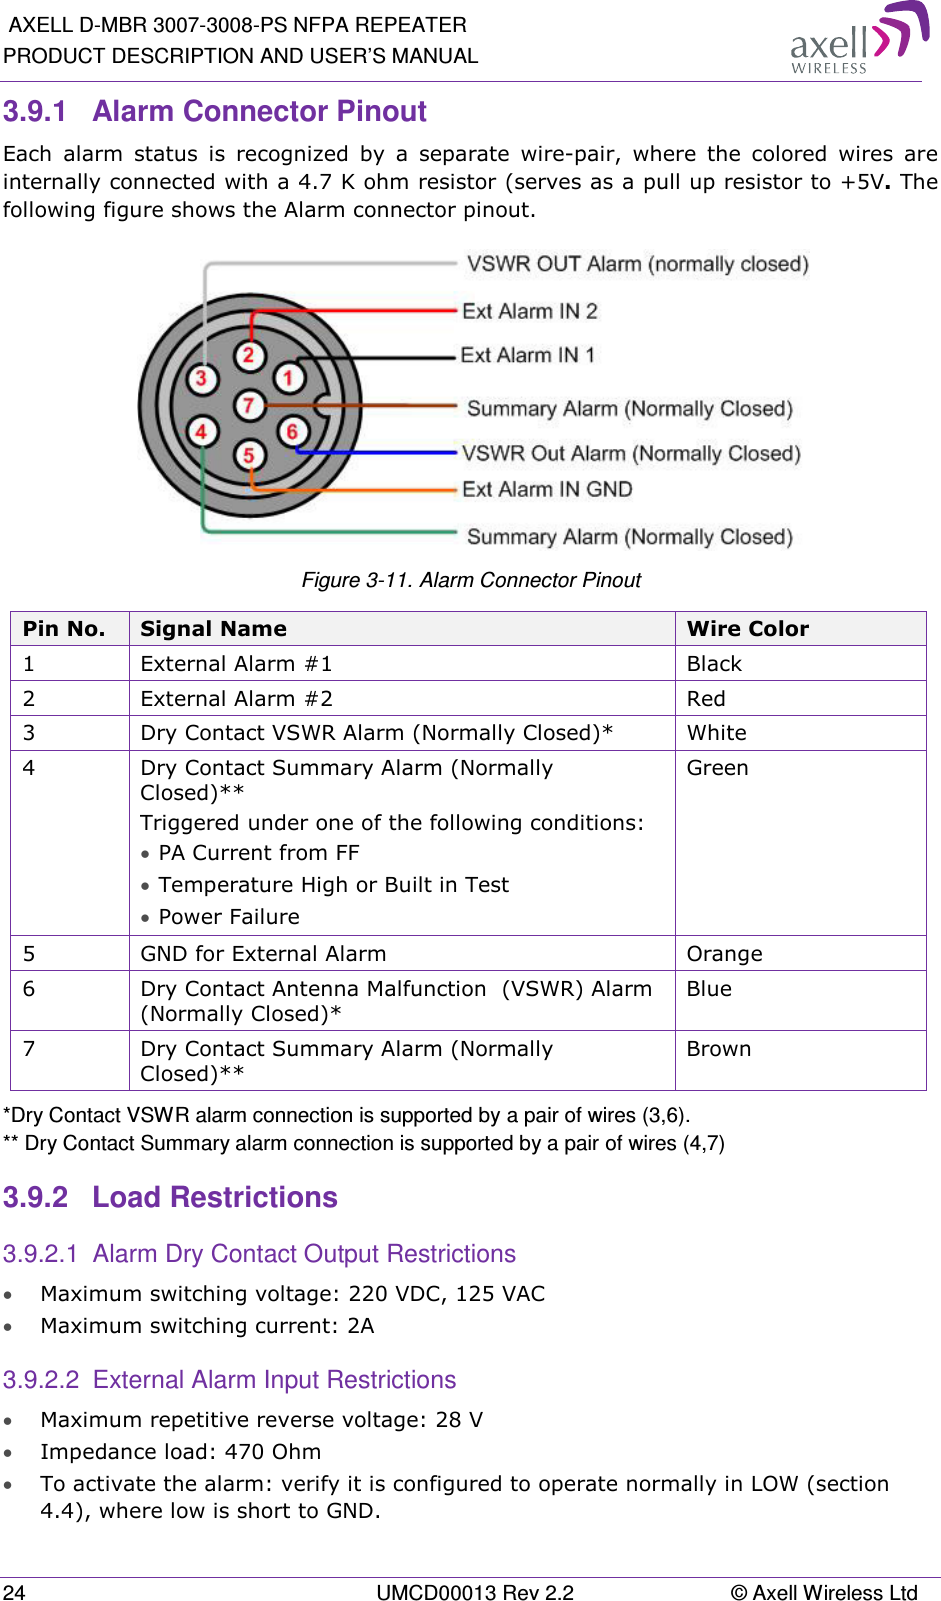  AXELL D-MBR 3007-3008-PS NFPA REPEATER PRODUCT DESCRIPTION AND USER’S MANUAL 24  UMCD00013 Rev 2.2  © Axell Wireless Ltd 3.9.1  Alarm Connector Pinout Each  alarm  status  is  recognized  by  a  separate  wire-pair,  where  the  colored  wires  are internally connected with a 4.7 K ohm resistor (serves as a pull up resistor to +5V. The following figure shows the Alarm connector pinout.  Figure  3-11. Alarm Connector Pinout Pin No.  Signal Name  Wire Color 1  External Alarm #1  Black 2  External Alarm #2  Red 3  Dry Contact VSWR Alarm (Normally Closed)*  White 4  Dry Contact Summary Alarm (Normally Closed)** Triggered under one of the following conditions: • PA Current from FF • Temperature High or Built in Test • Power Failure Green 5  GND for External Alarm  Orange 6  Dry Contact Antenna Malfunction  (VSWR) Alarm (Normally Closed)* Blue 7  Dry Contact Summary Alarm (Normally Closed)** Brown *Dry Contact VSWR alarm connection is supported by a pair of wires (3,6). ** Dry Contact Summary alarm connection is supported by a pair of wires (4,7) 3.9.2  Load Restrictions 3.9.2.1  Alarm Dry Contact Output Restrictions • Maximum switching voltage: 220 VDC, 125 VAC • Maximum switching current: 2A 3.9.2.2  External Alarm Input Restrictions • Maximum repetitive reverse voltage: 28 V • Impedance load: 470 Ohm • To activate the alarm: verify it is configured to operate normally in LOW (section  4.4), where low is short to GND.  